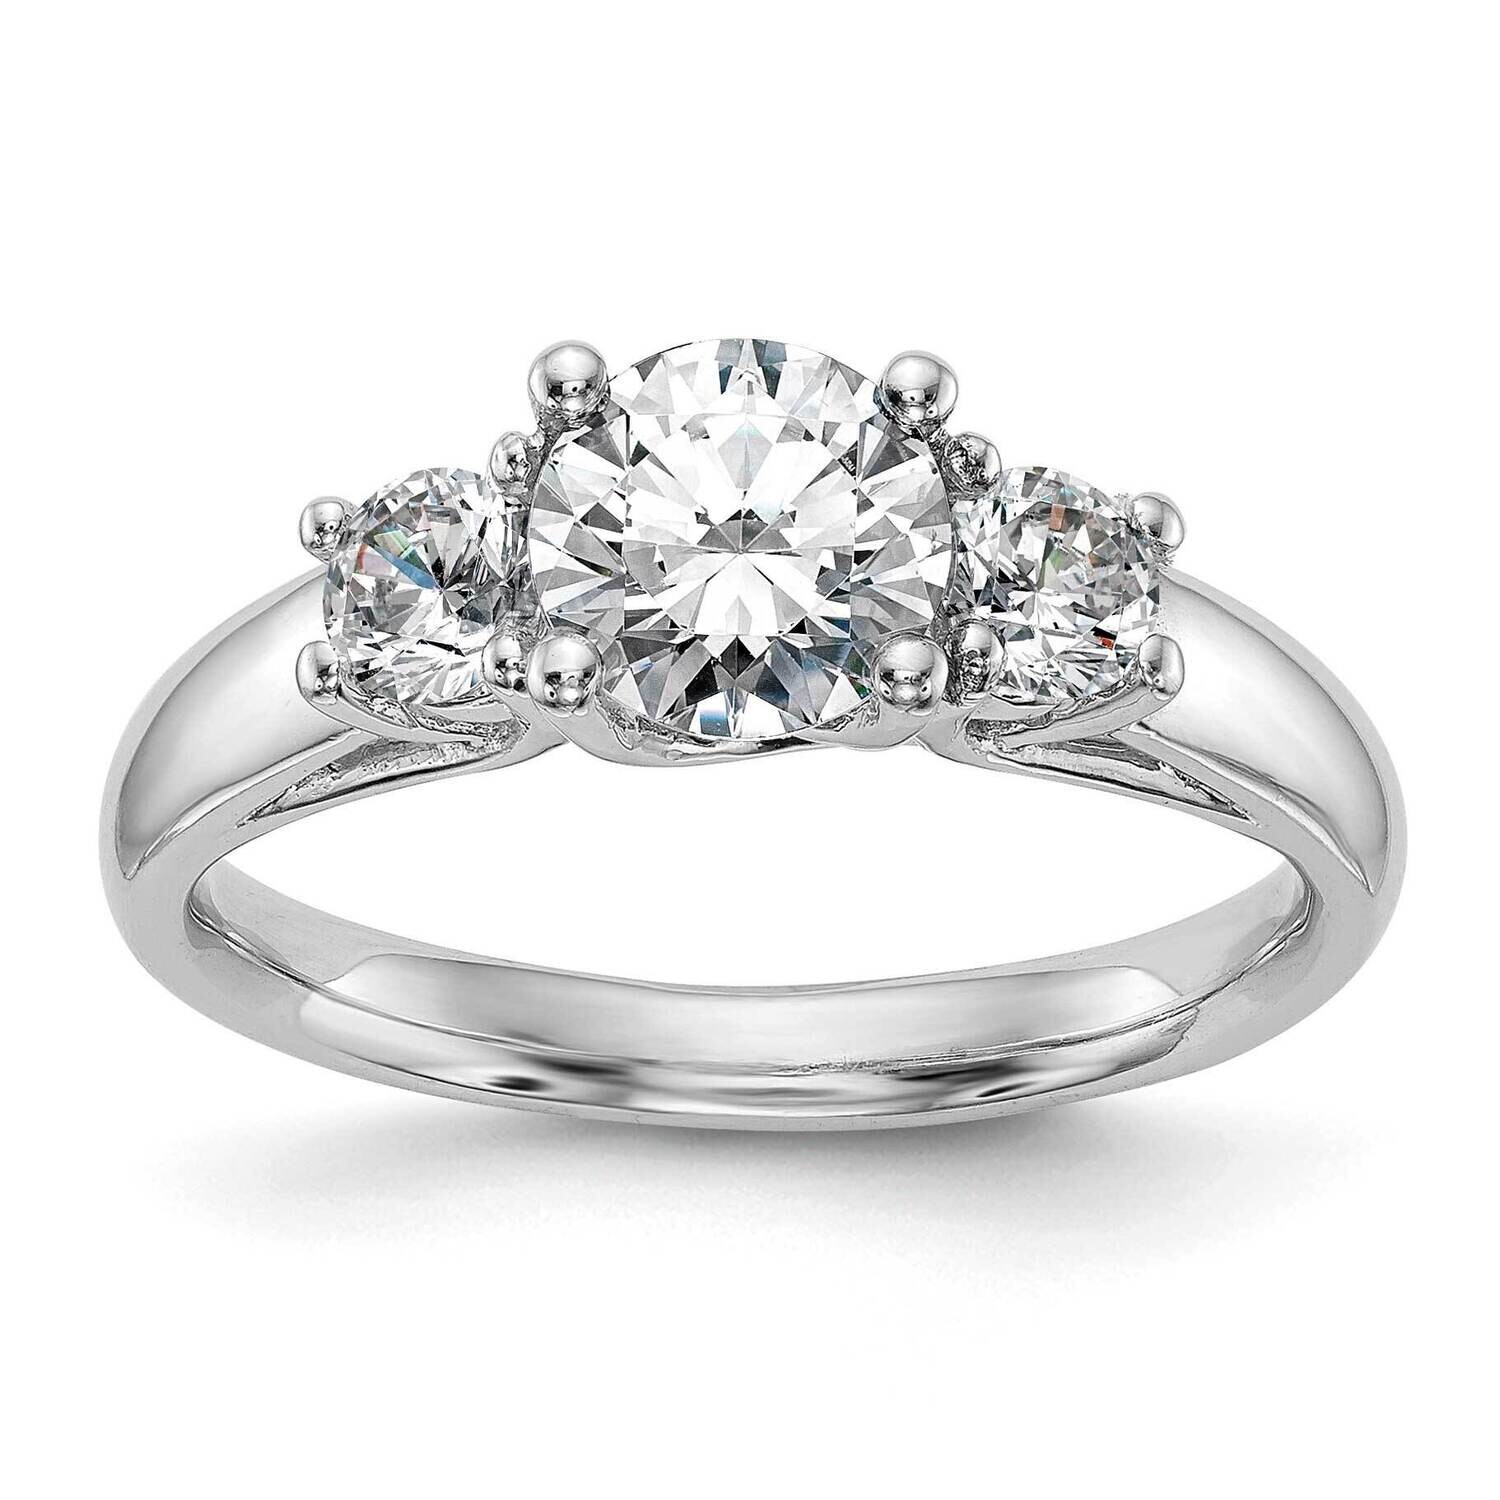 3-Stone Holds 1 Carat 6.5mm Round Center 2-5.2mm Round Sides Engagement Ring Mounting 14k White Gold RM2955E-100-CWAA